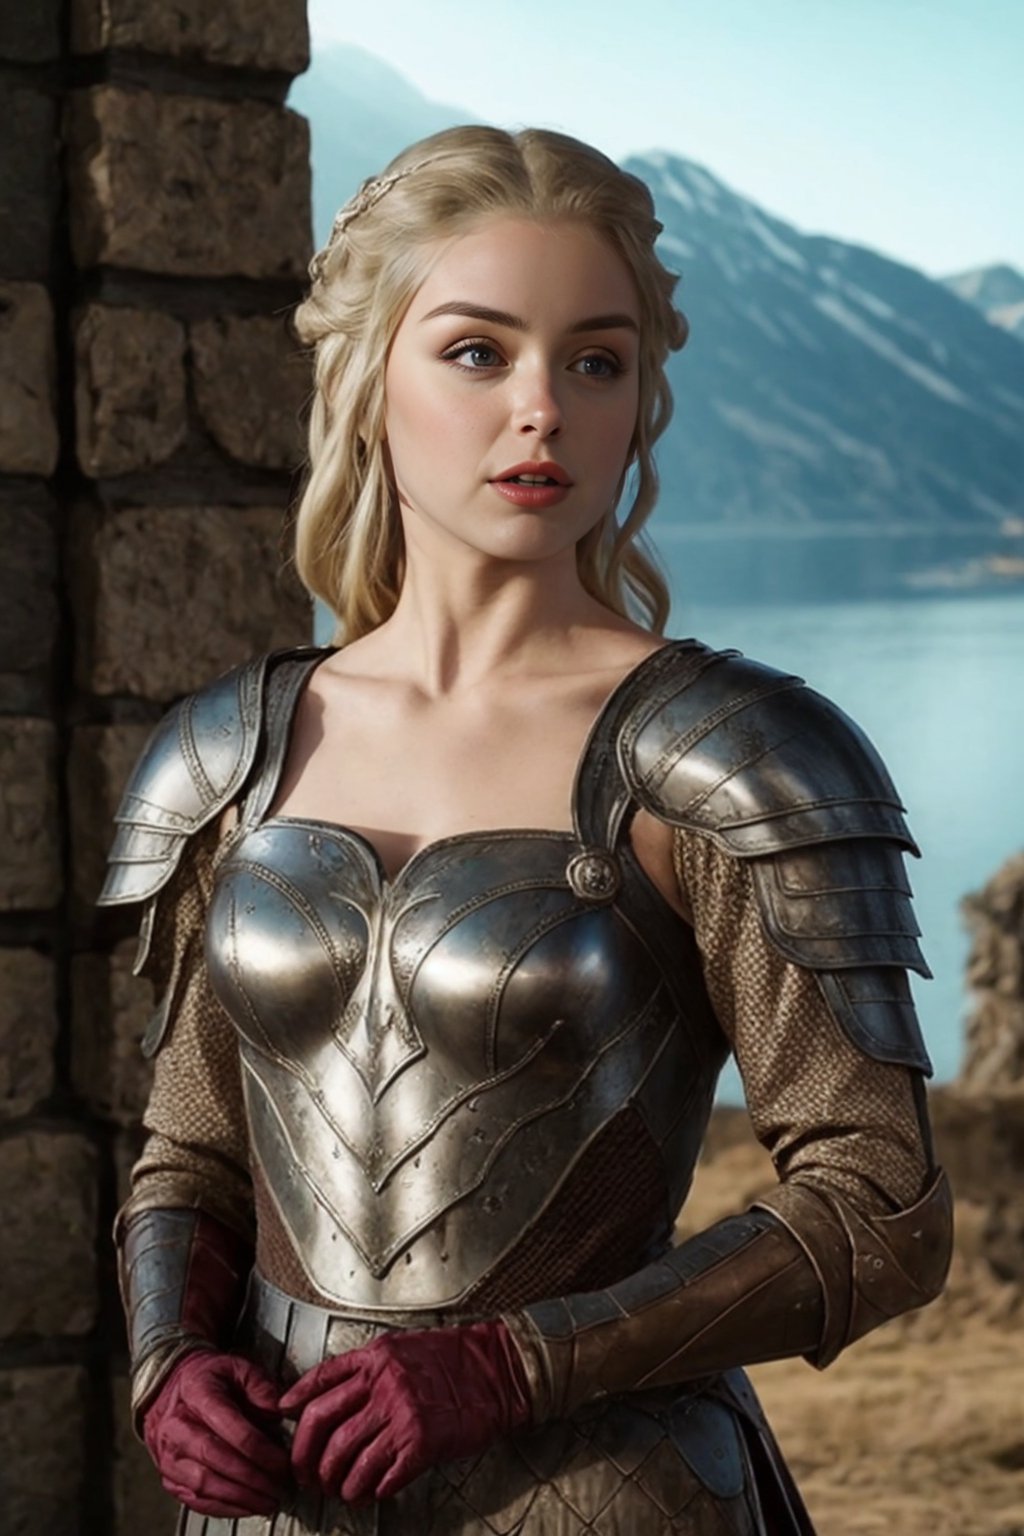 (Daenergs Tagaryen),Knight, Armour, silver, gothic, Arthurian, camelot, dnd character portrait, high fantasy, castle background, kings landing, dragon princess of the seven kingdom, realistic,Game of Thrones,dragonborn, honor,dragon fire, (high detailed skin:1.1), lord of the rings (but careful with the word "lord"),